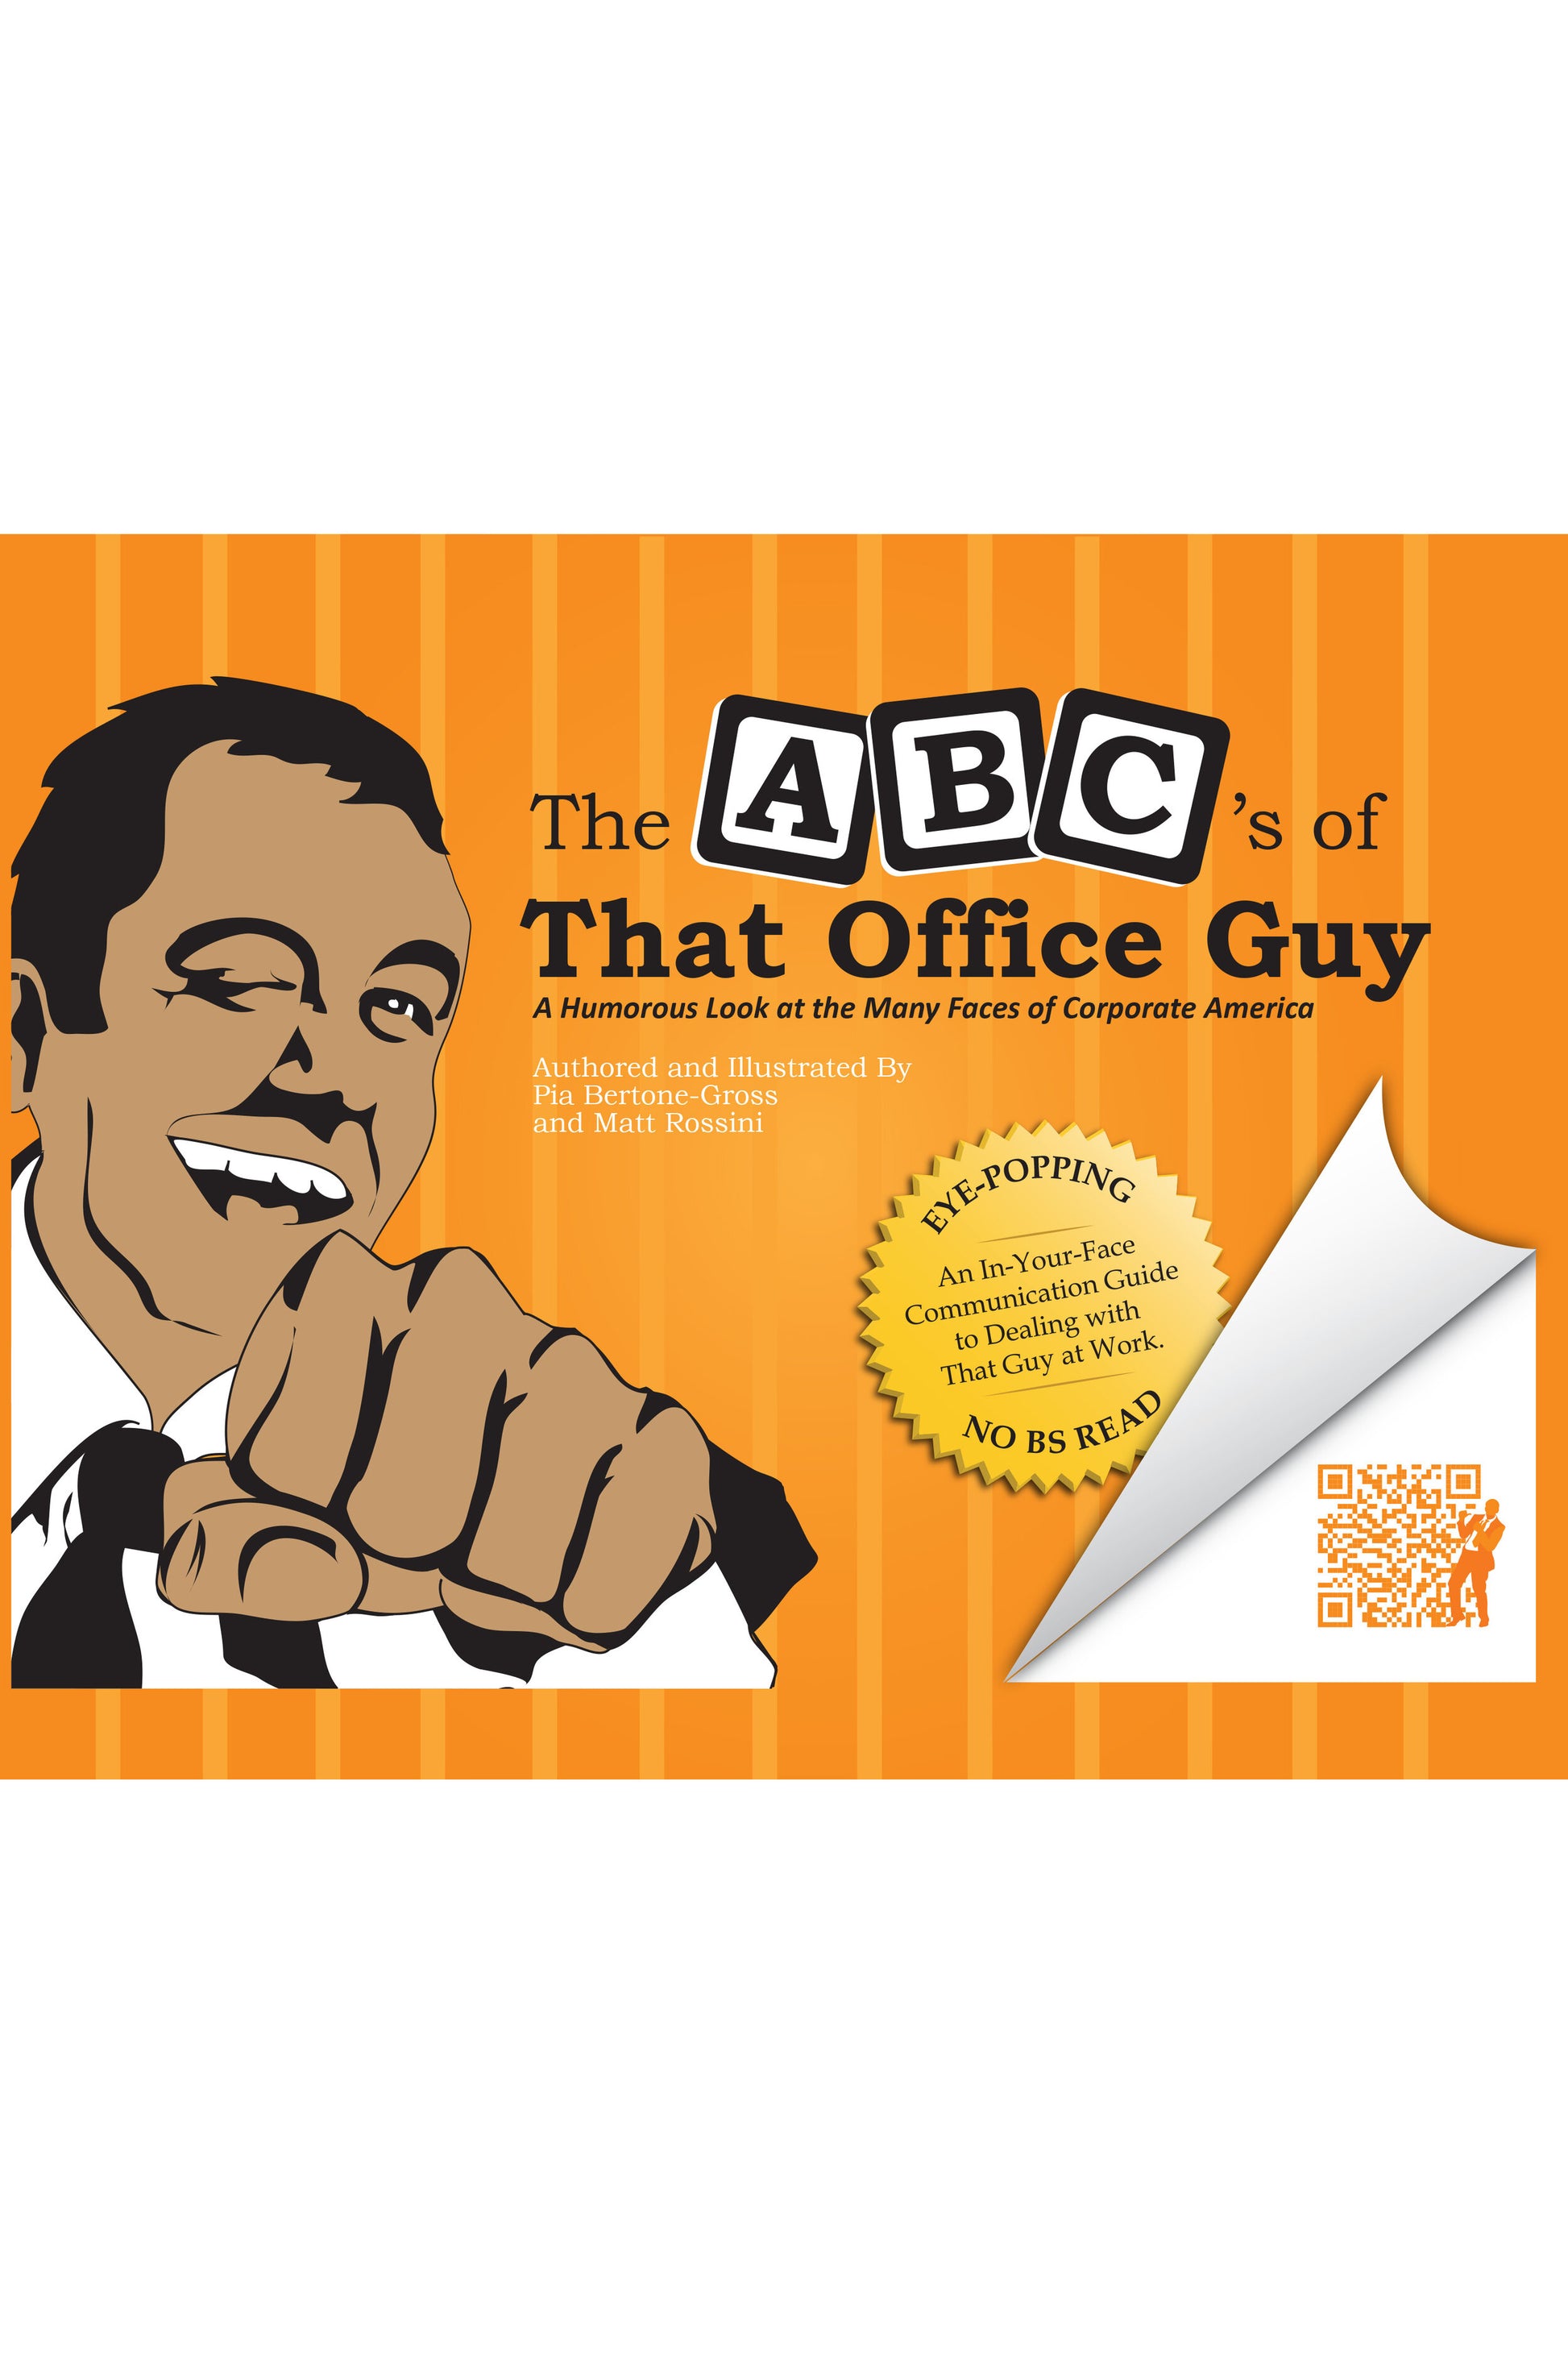 The ABC's of That Office Guy: A Humorous Look at the Many Faces of Corporate America